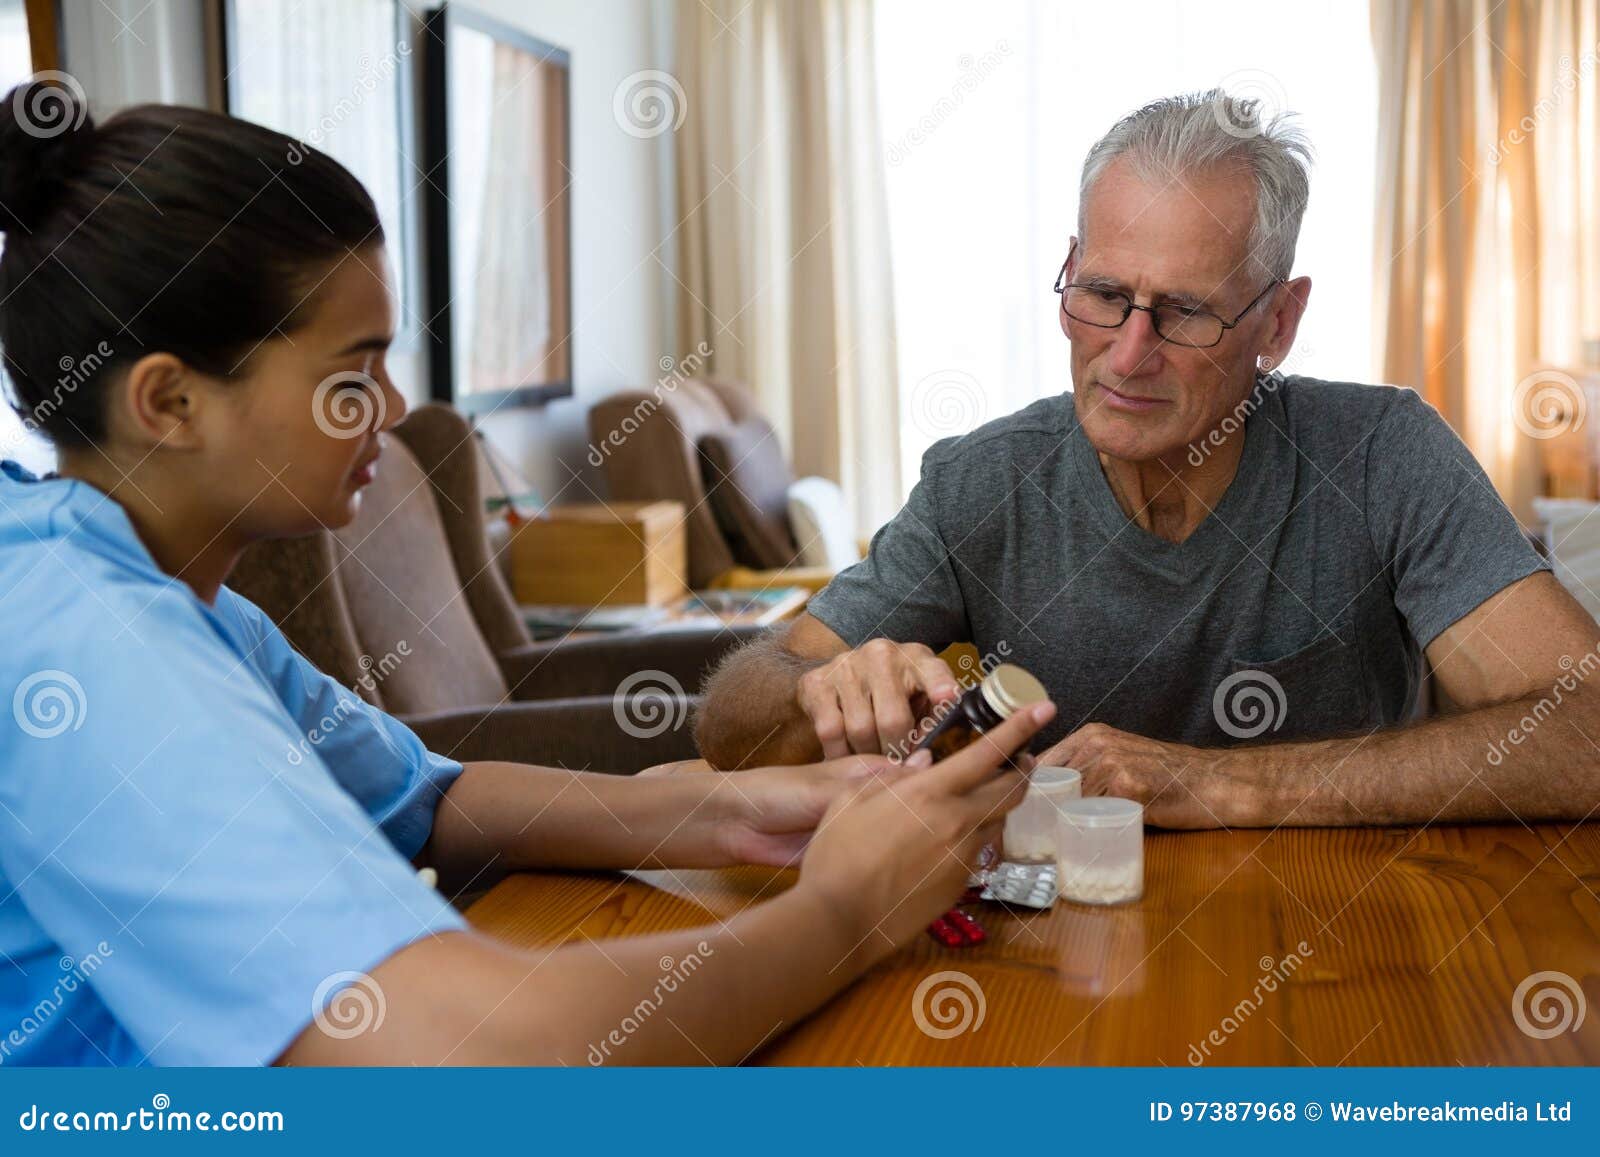 doctor guiding senior man in taking medicine at table